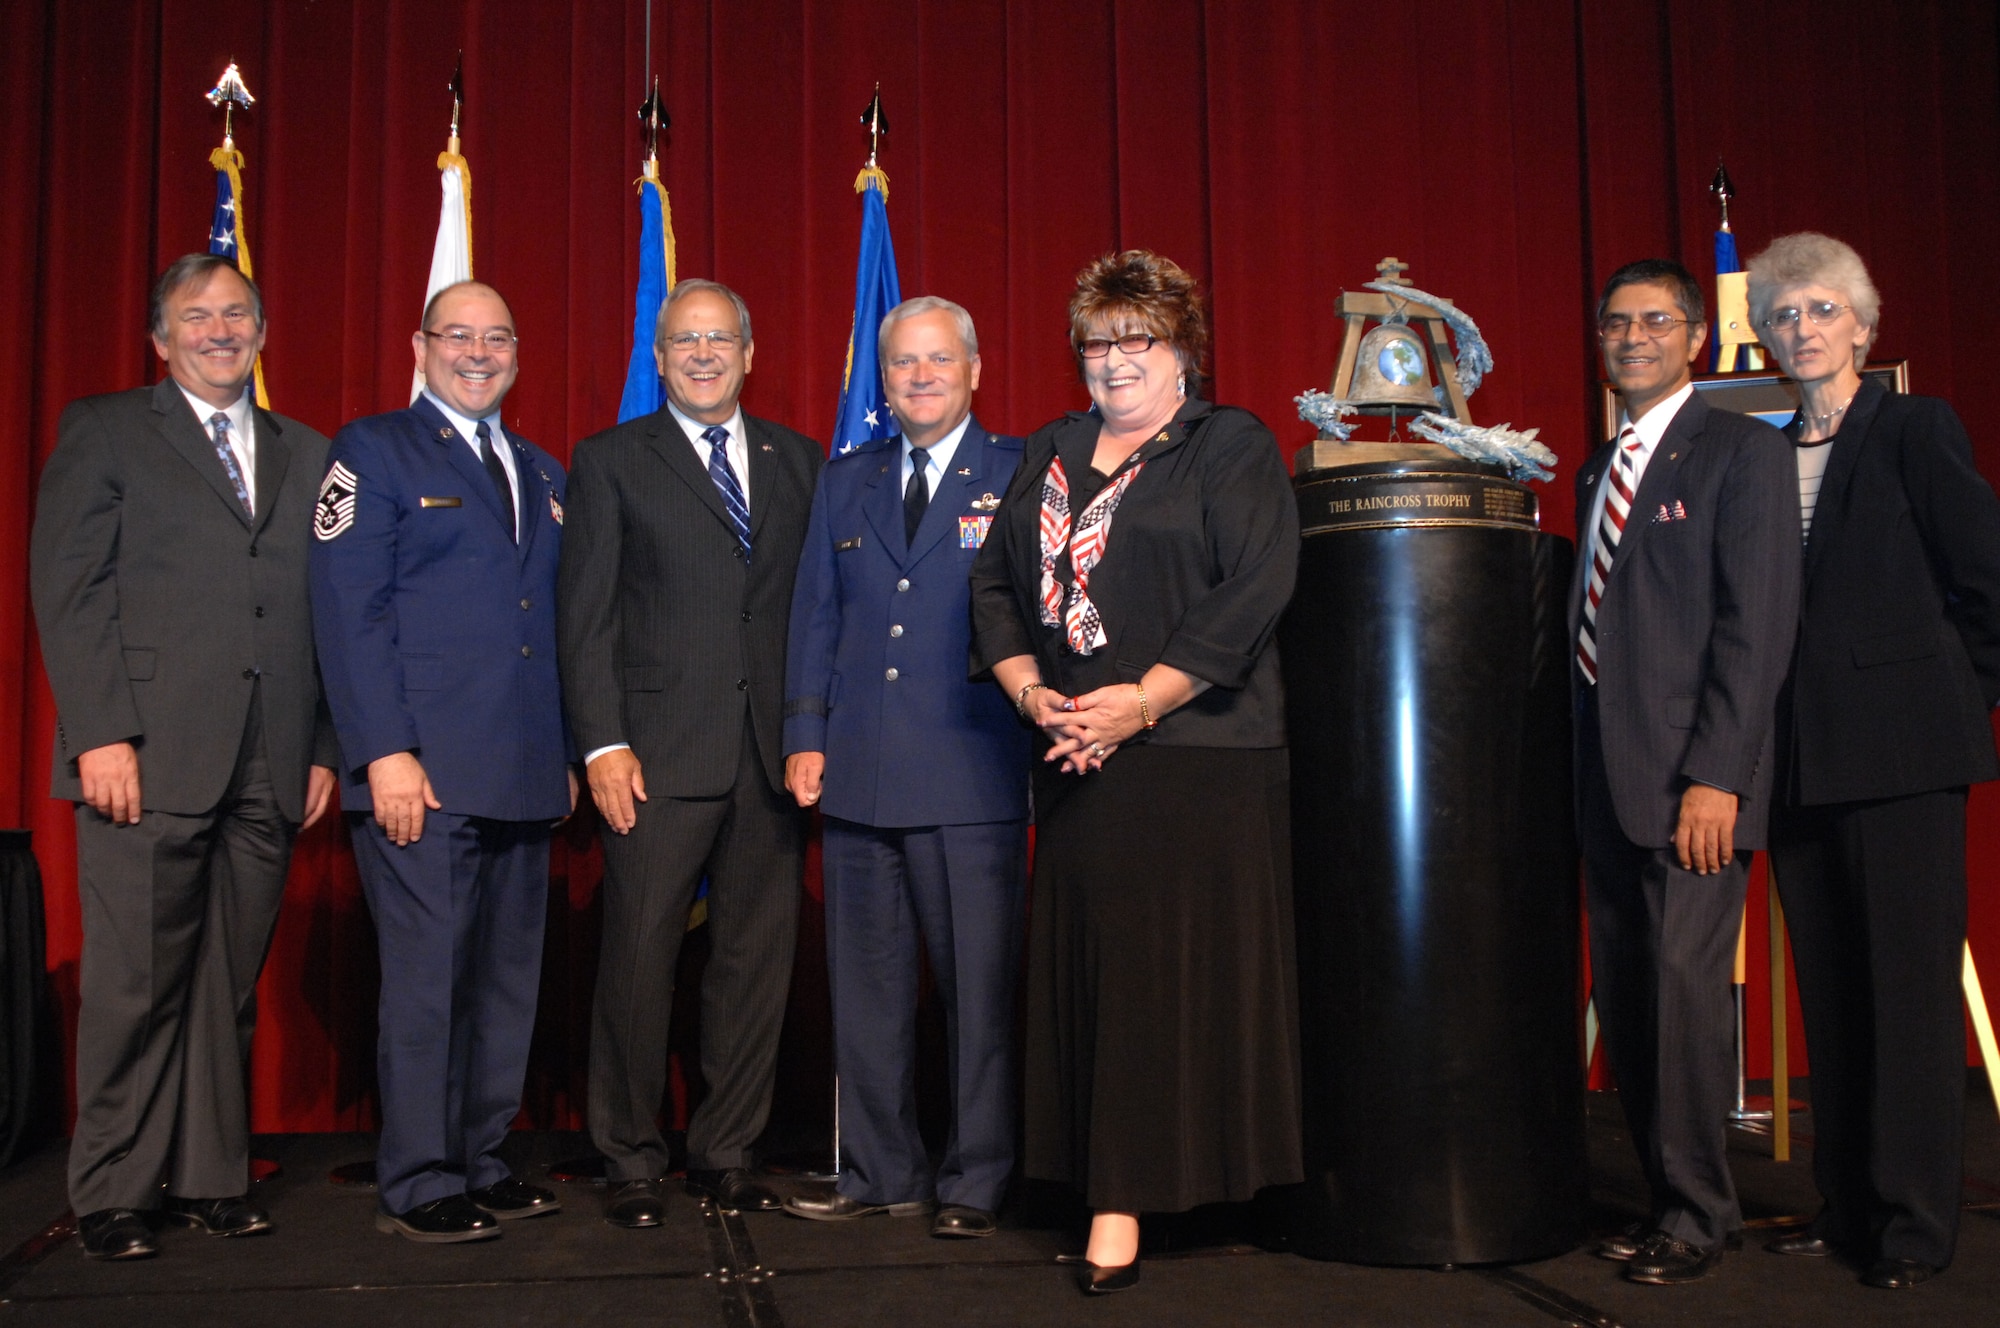 From left to right, Mr. Mike Vanderpool; Chief Master Sgt. Agustin Huerta, 452nd Air Mobility Wing, March Air Reserve Base, Calif., Command Chief; Mr. Roger Rupp; Brig. Gen. James Melin, Commander, 452nd AMW; Ms. Laura Froehlich; Mr. Jamil Dada; and Co. (ret) Nancy Driscoll, pose with the Raincross Trophy after it was awarded to the 452nd AMW at the 11th Annual Raincross Trophy Dinner held July 23, 2009, at the Riverside Convention Center, Riverside, Calif. The dinner is hosted by the Greater Riverside Chambers of Commerce Military Affairs Committee to honor and recognize the 11 wings and two groups in 4th Air Force.  (U.S. Air Force photo/Senior Master Sgt. Kim Allain)  (released)